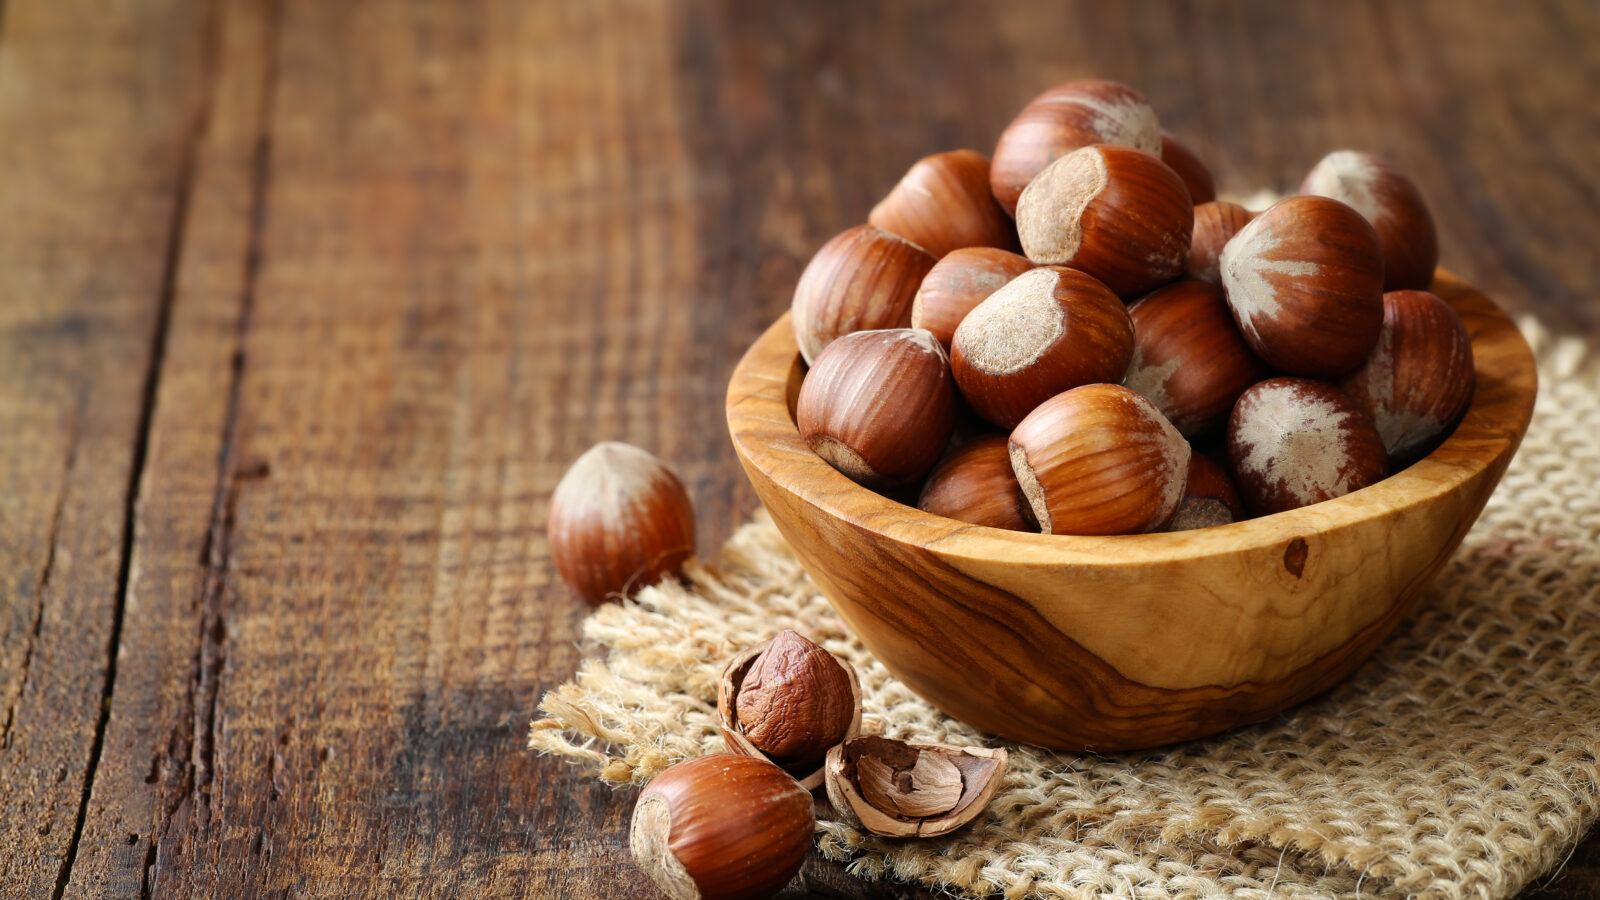 Hazelnuts in a wooden bowl on rustic background